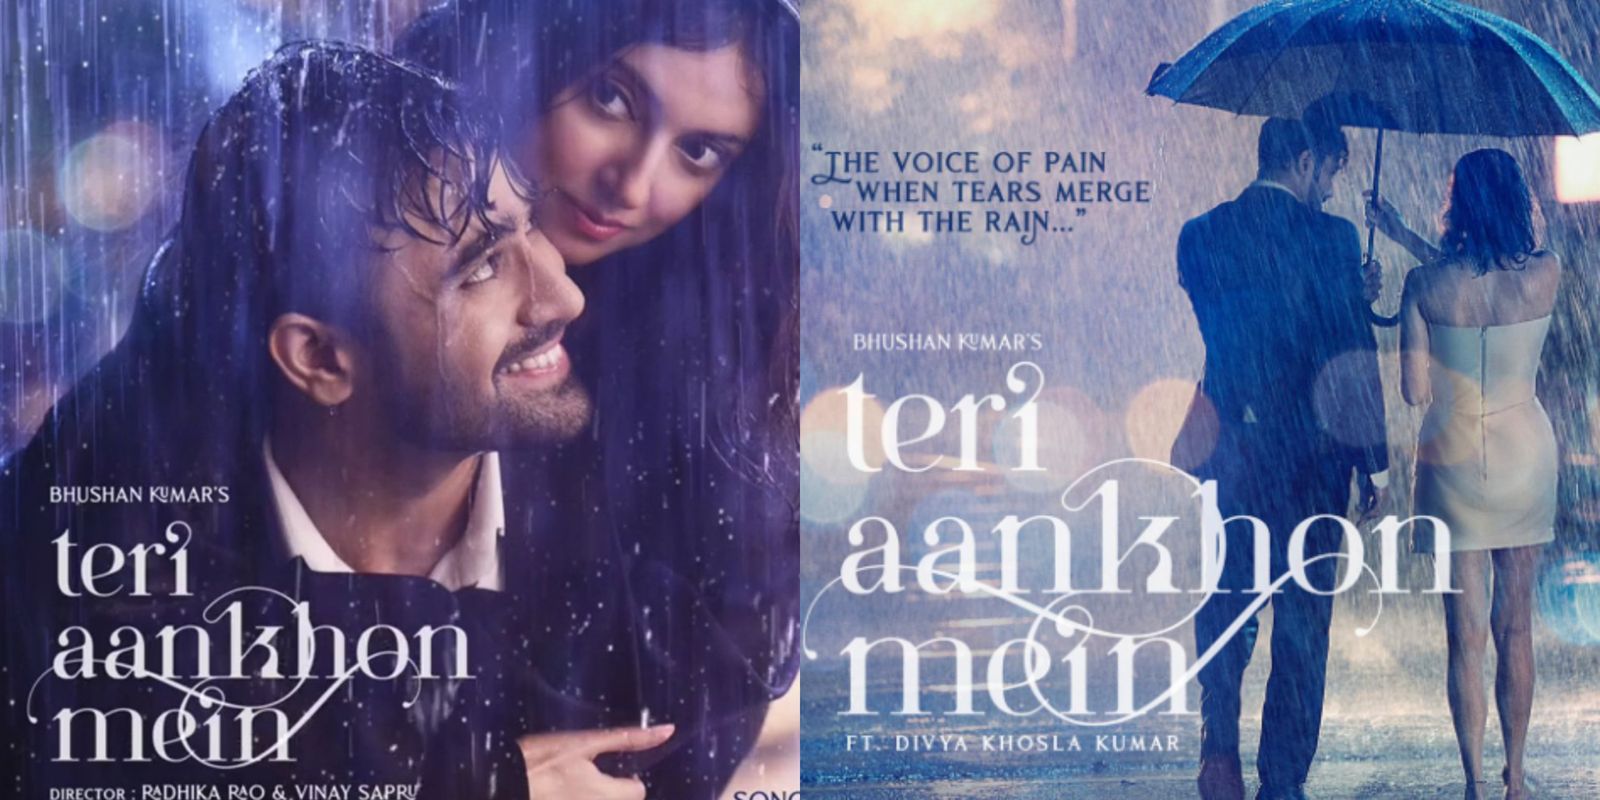 Teri Aankhon Mein Teaser: Divya Khosla Kumar And Pearl V Puri’s Love Story Will Leave You Intrigued; Watch